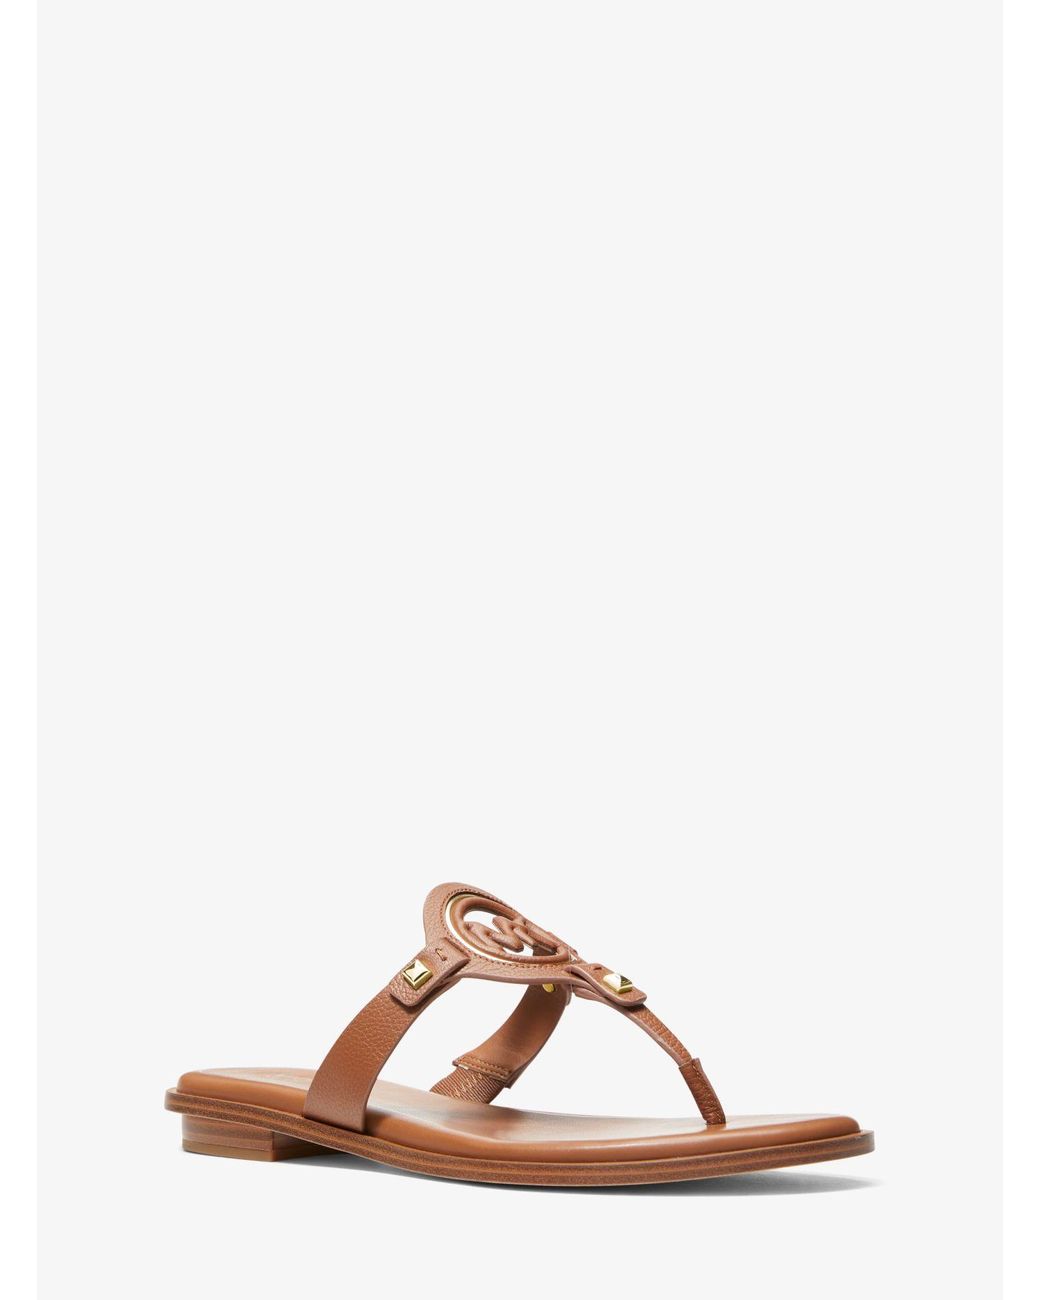 Michael Kors Aubrey Cutout Leather T-strap Sandal in Brown | Lyst